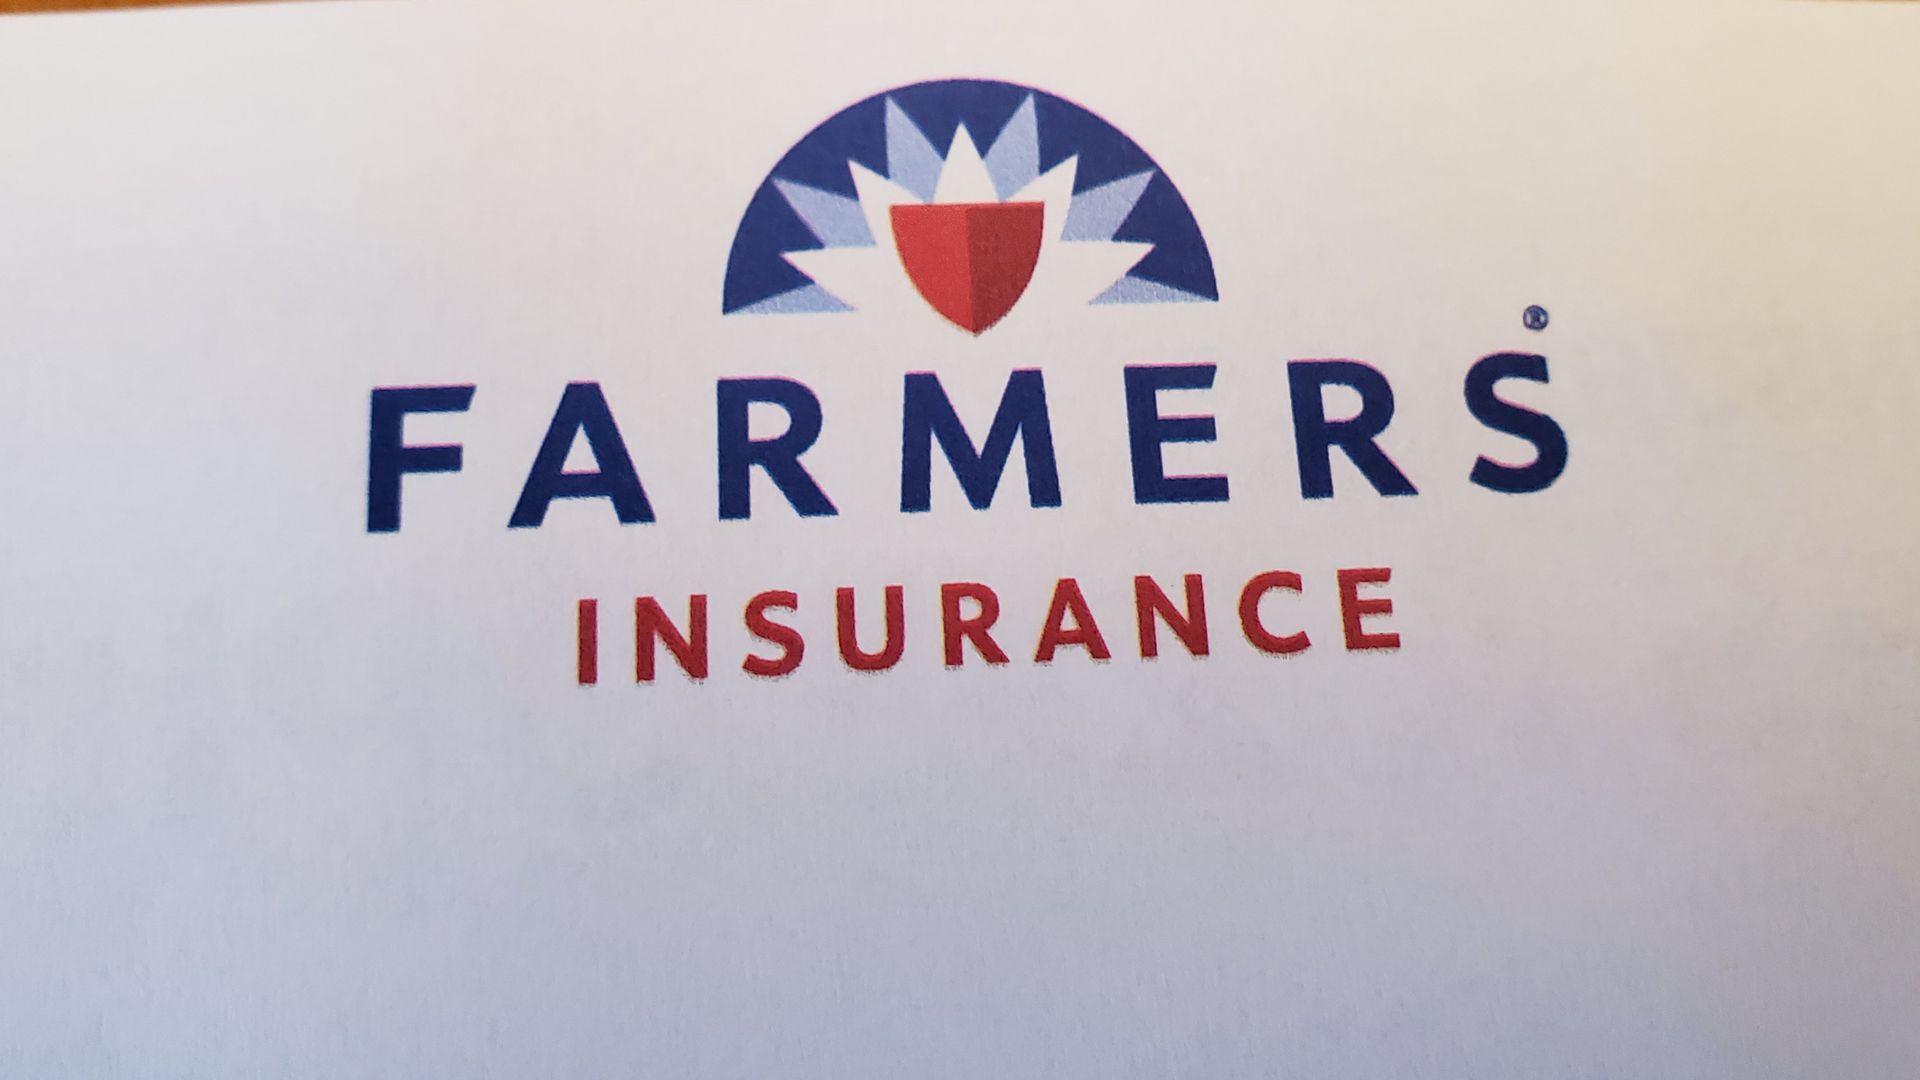 Farmers Insurance announced it would be the latest insurance company to limit its home insurance policies in California.